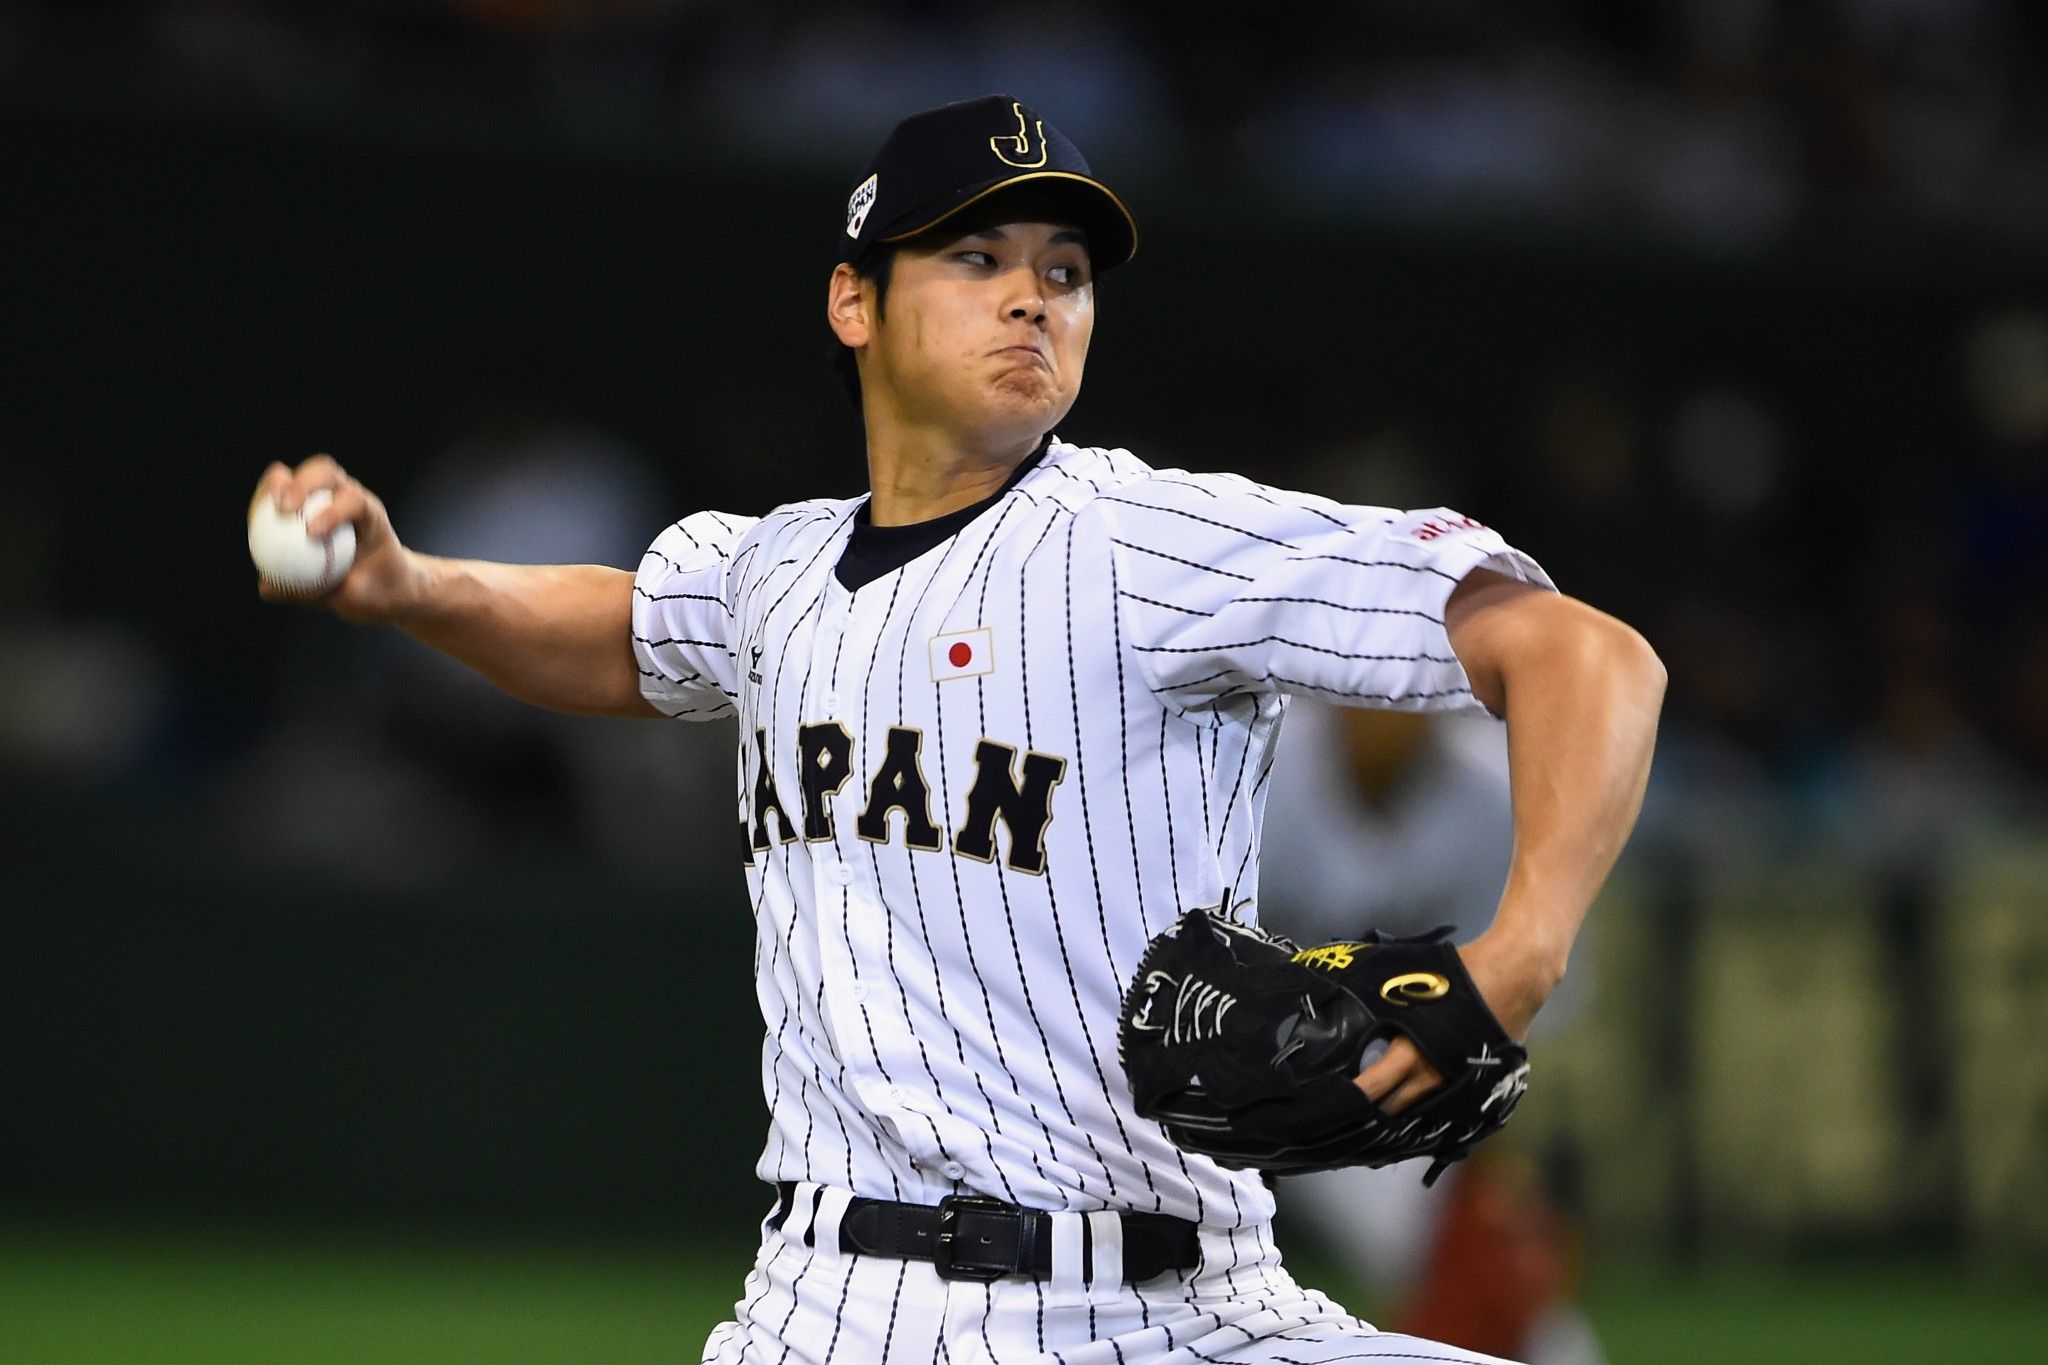 Shohei Otani gives up millions to play in MLB